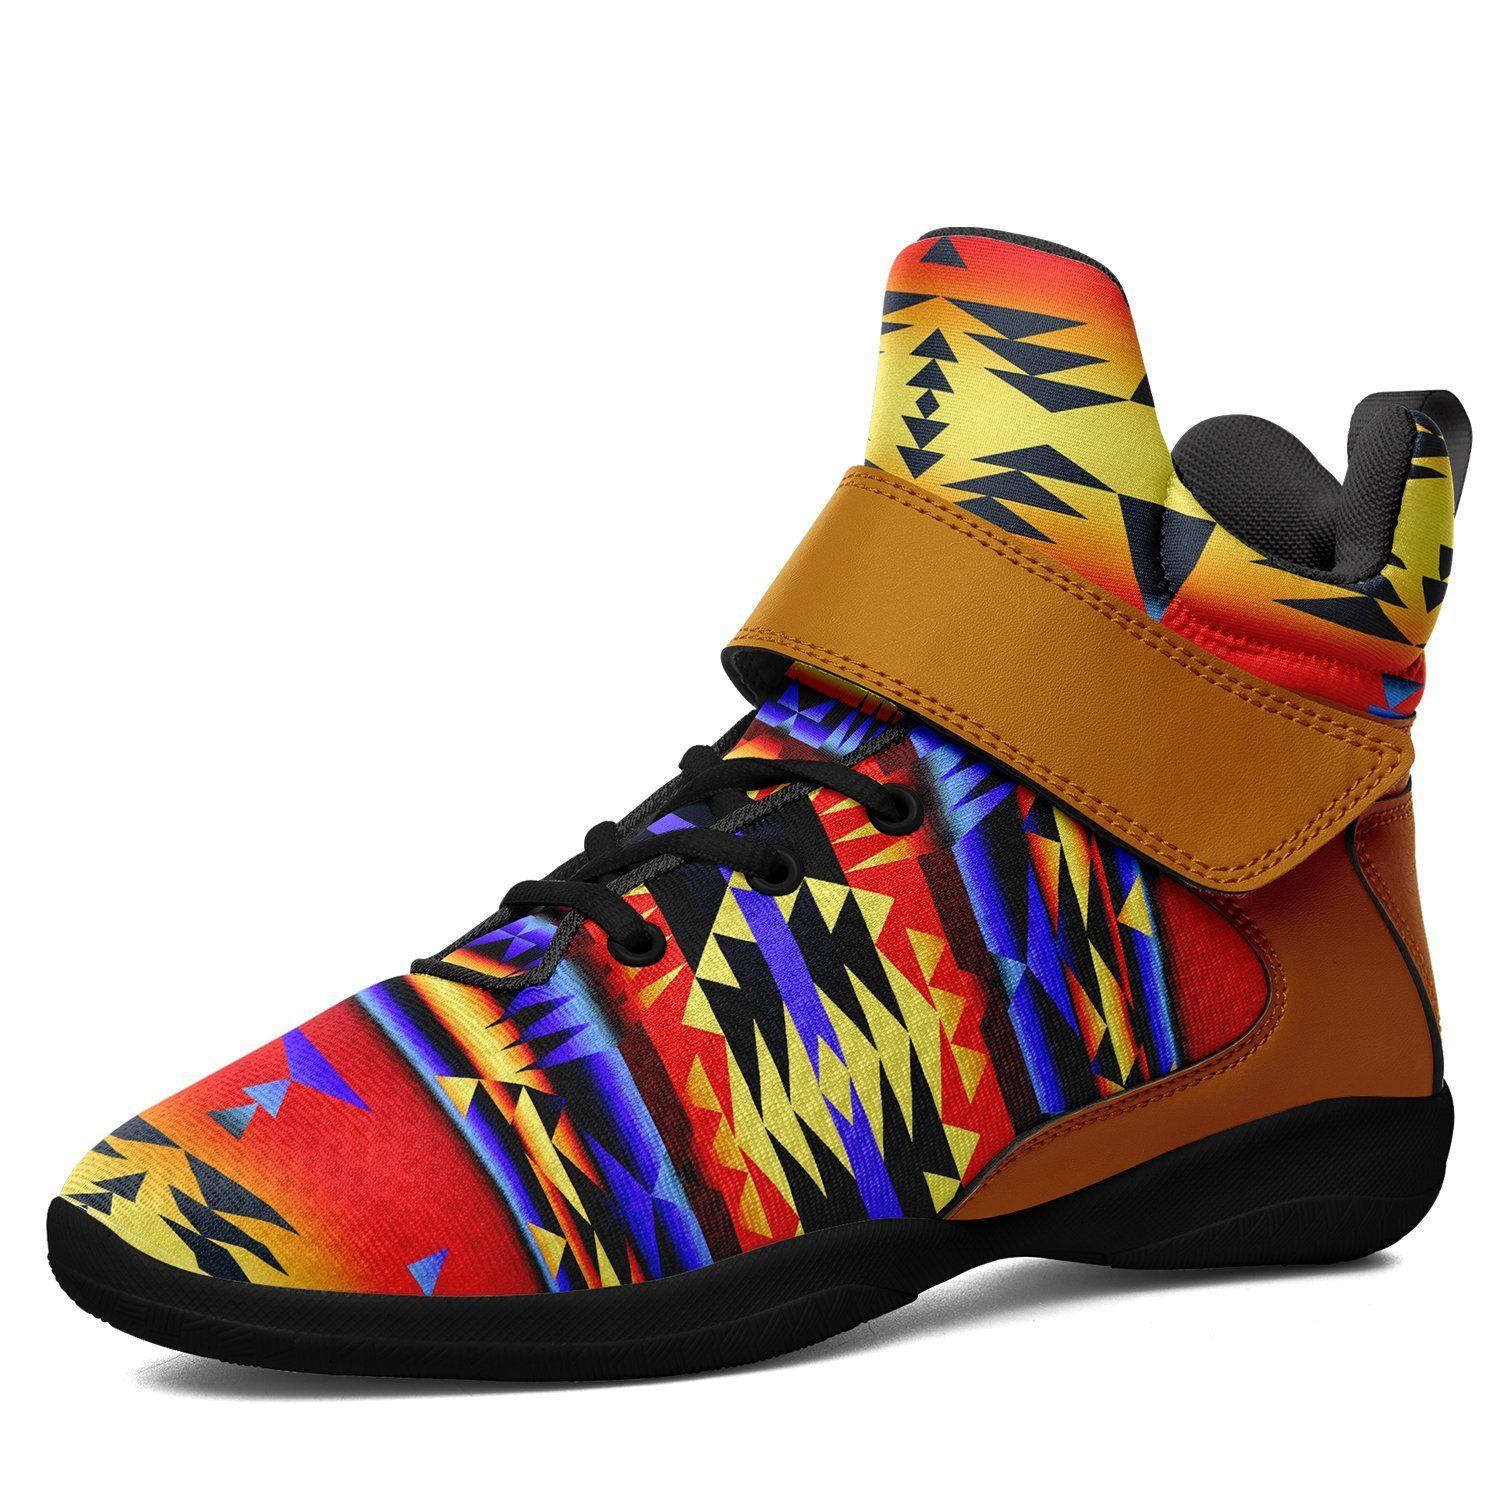 Between the San Juan Mountains Ipottaa Basketball / Sport High Top Shoes - Black Sole 49 Dzine US Men 7 / EUR 40 Black Sole with Brown Strap 